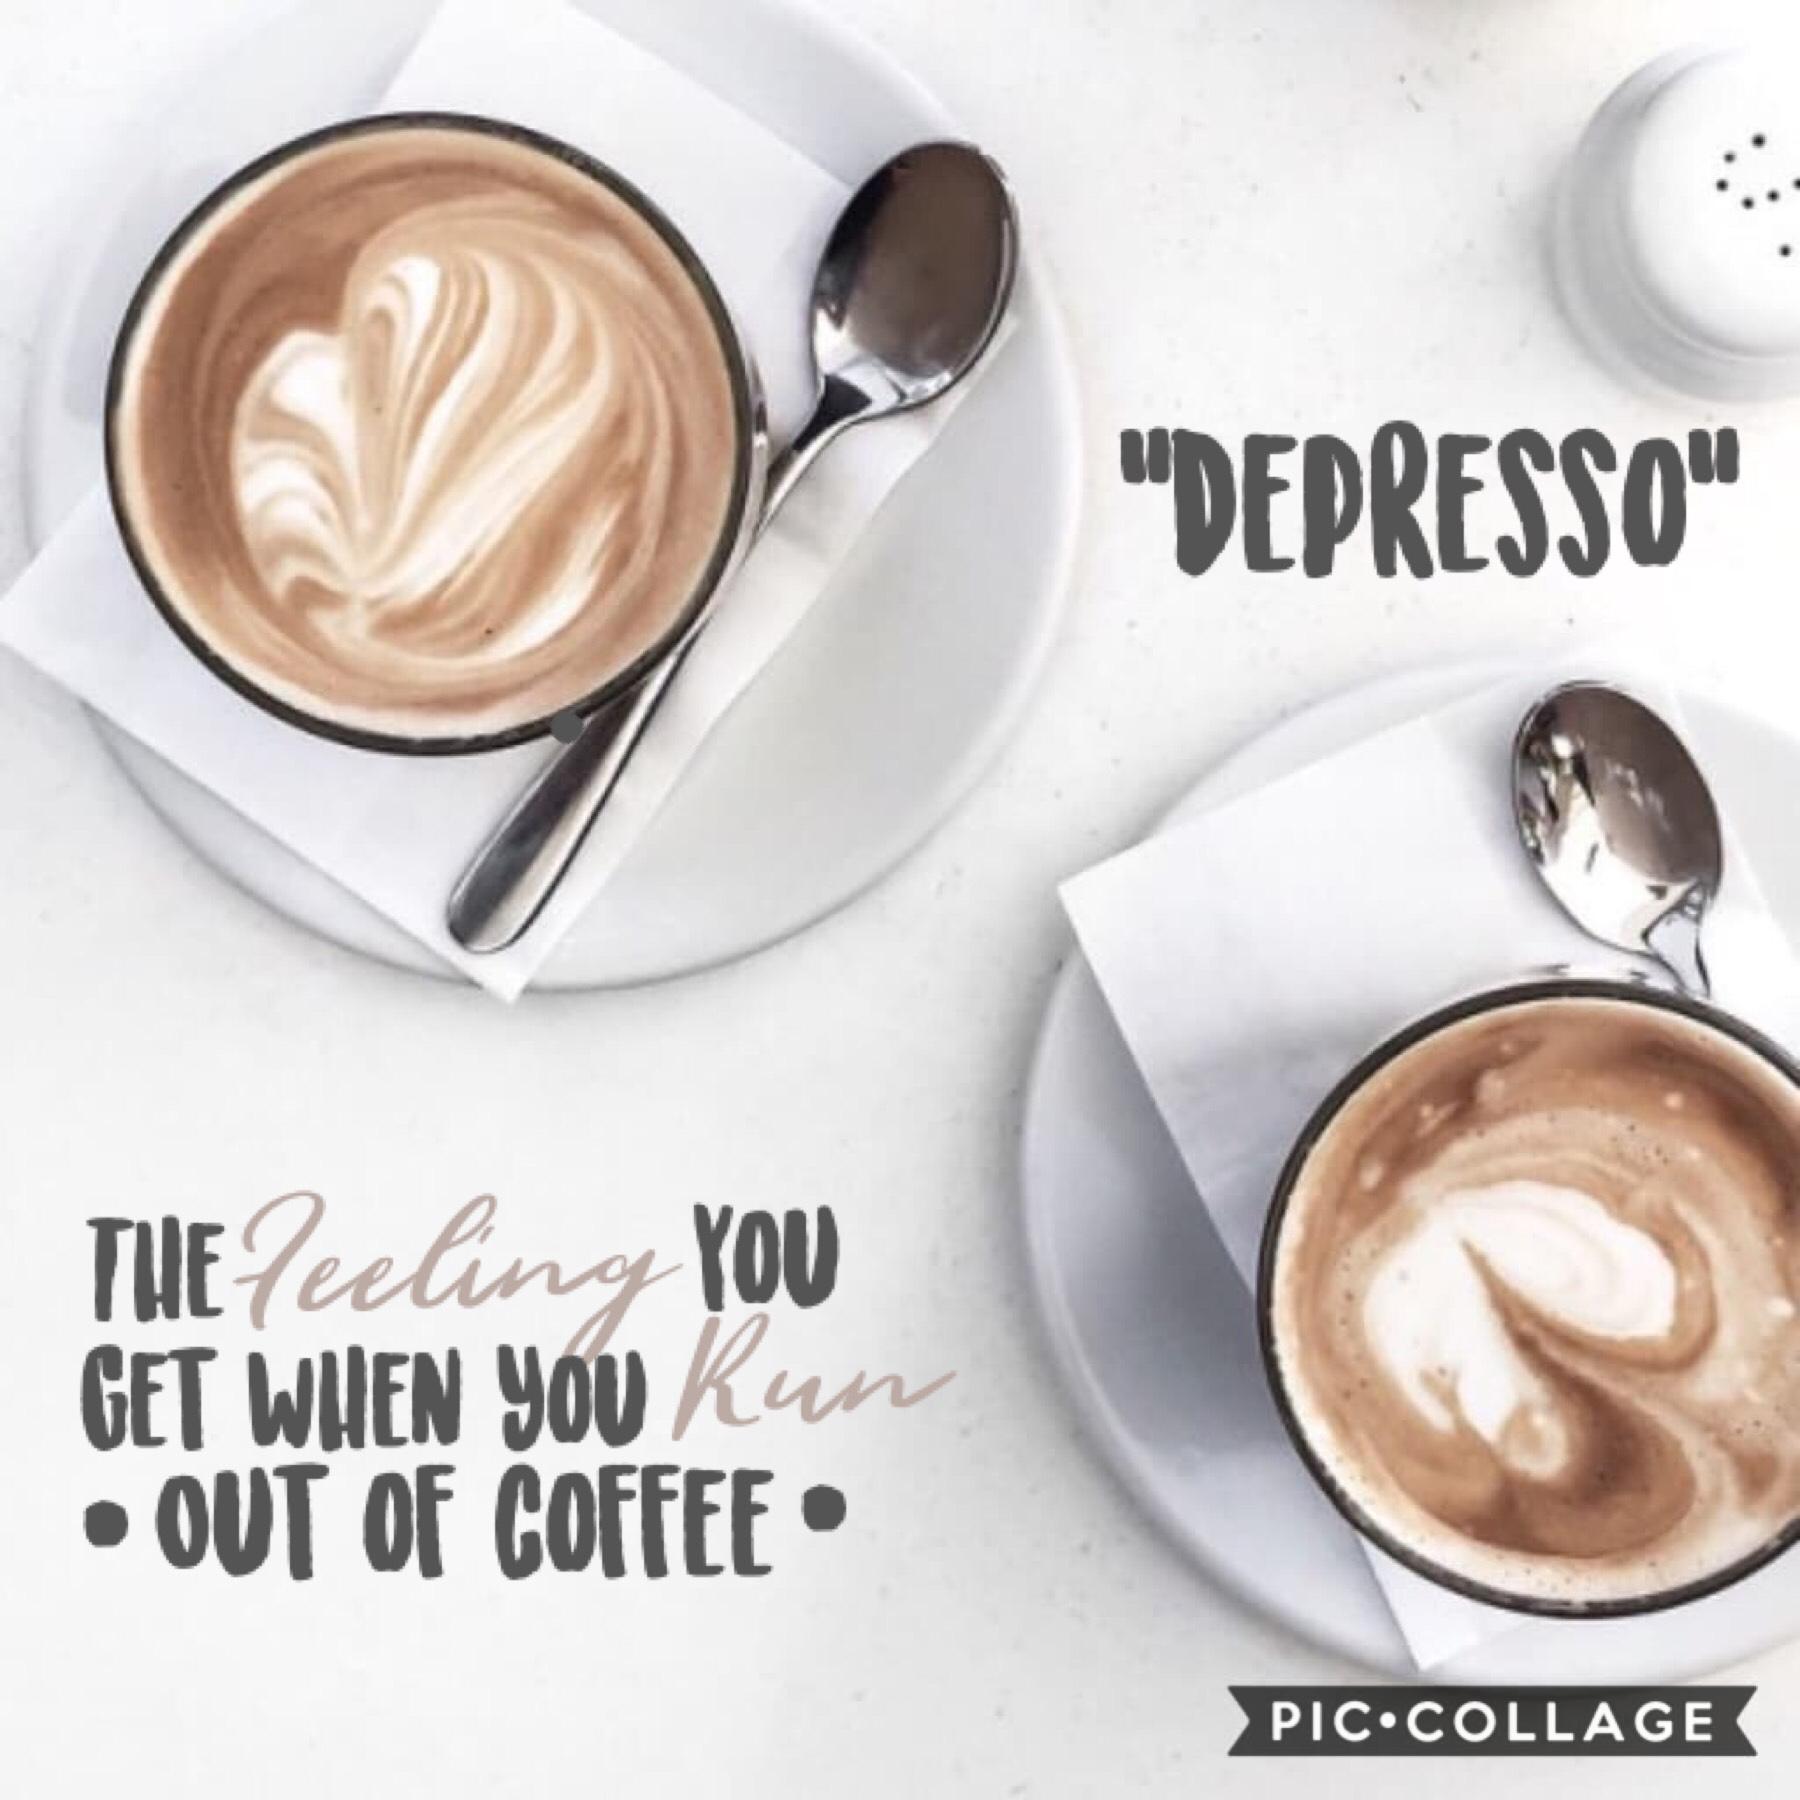  ☕️Tap for Coffee ☕️ 
Fine, I promised.. ☕️☕️☕️☕️☕️☕️☕️☕️☕️☕️☕️☕️☕️☕️☕️☕️☕️☕️
I can relate so muchhh! I lovee coffeee! 



